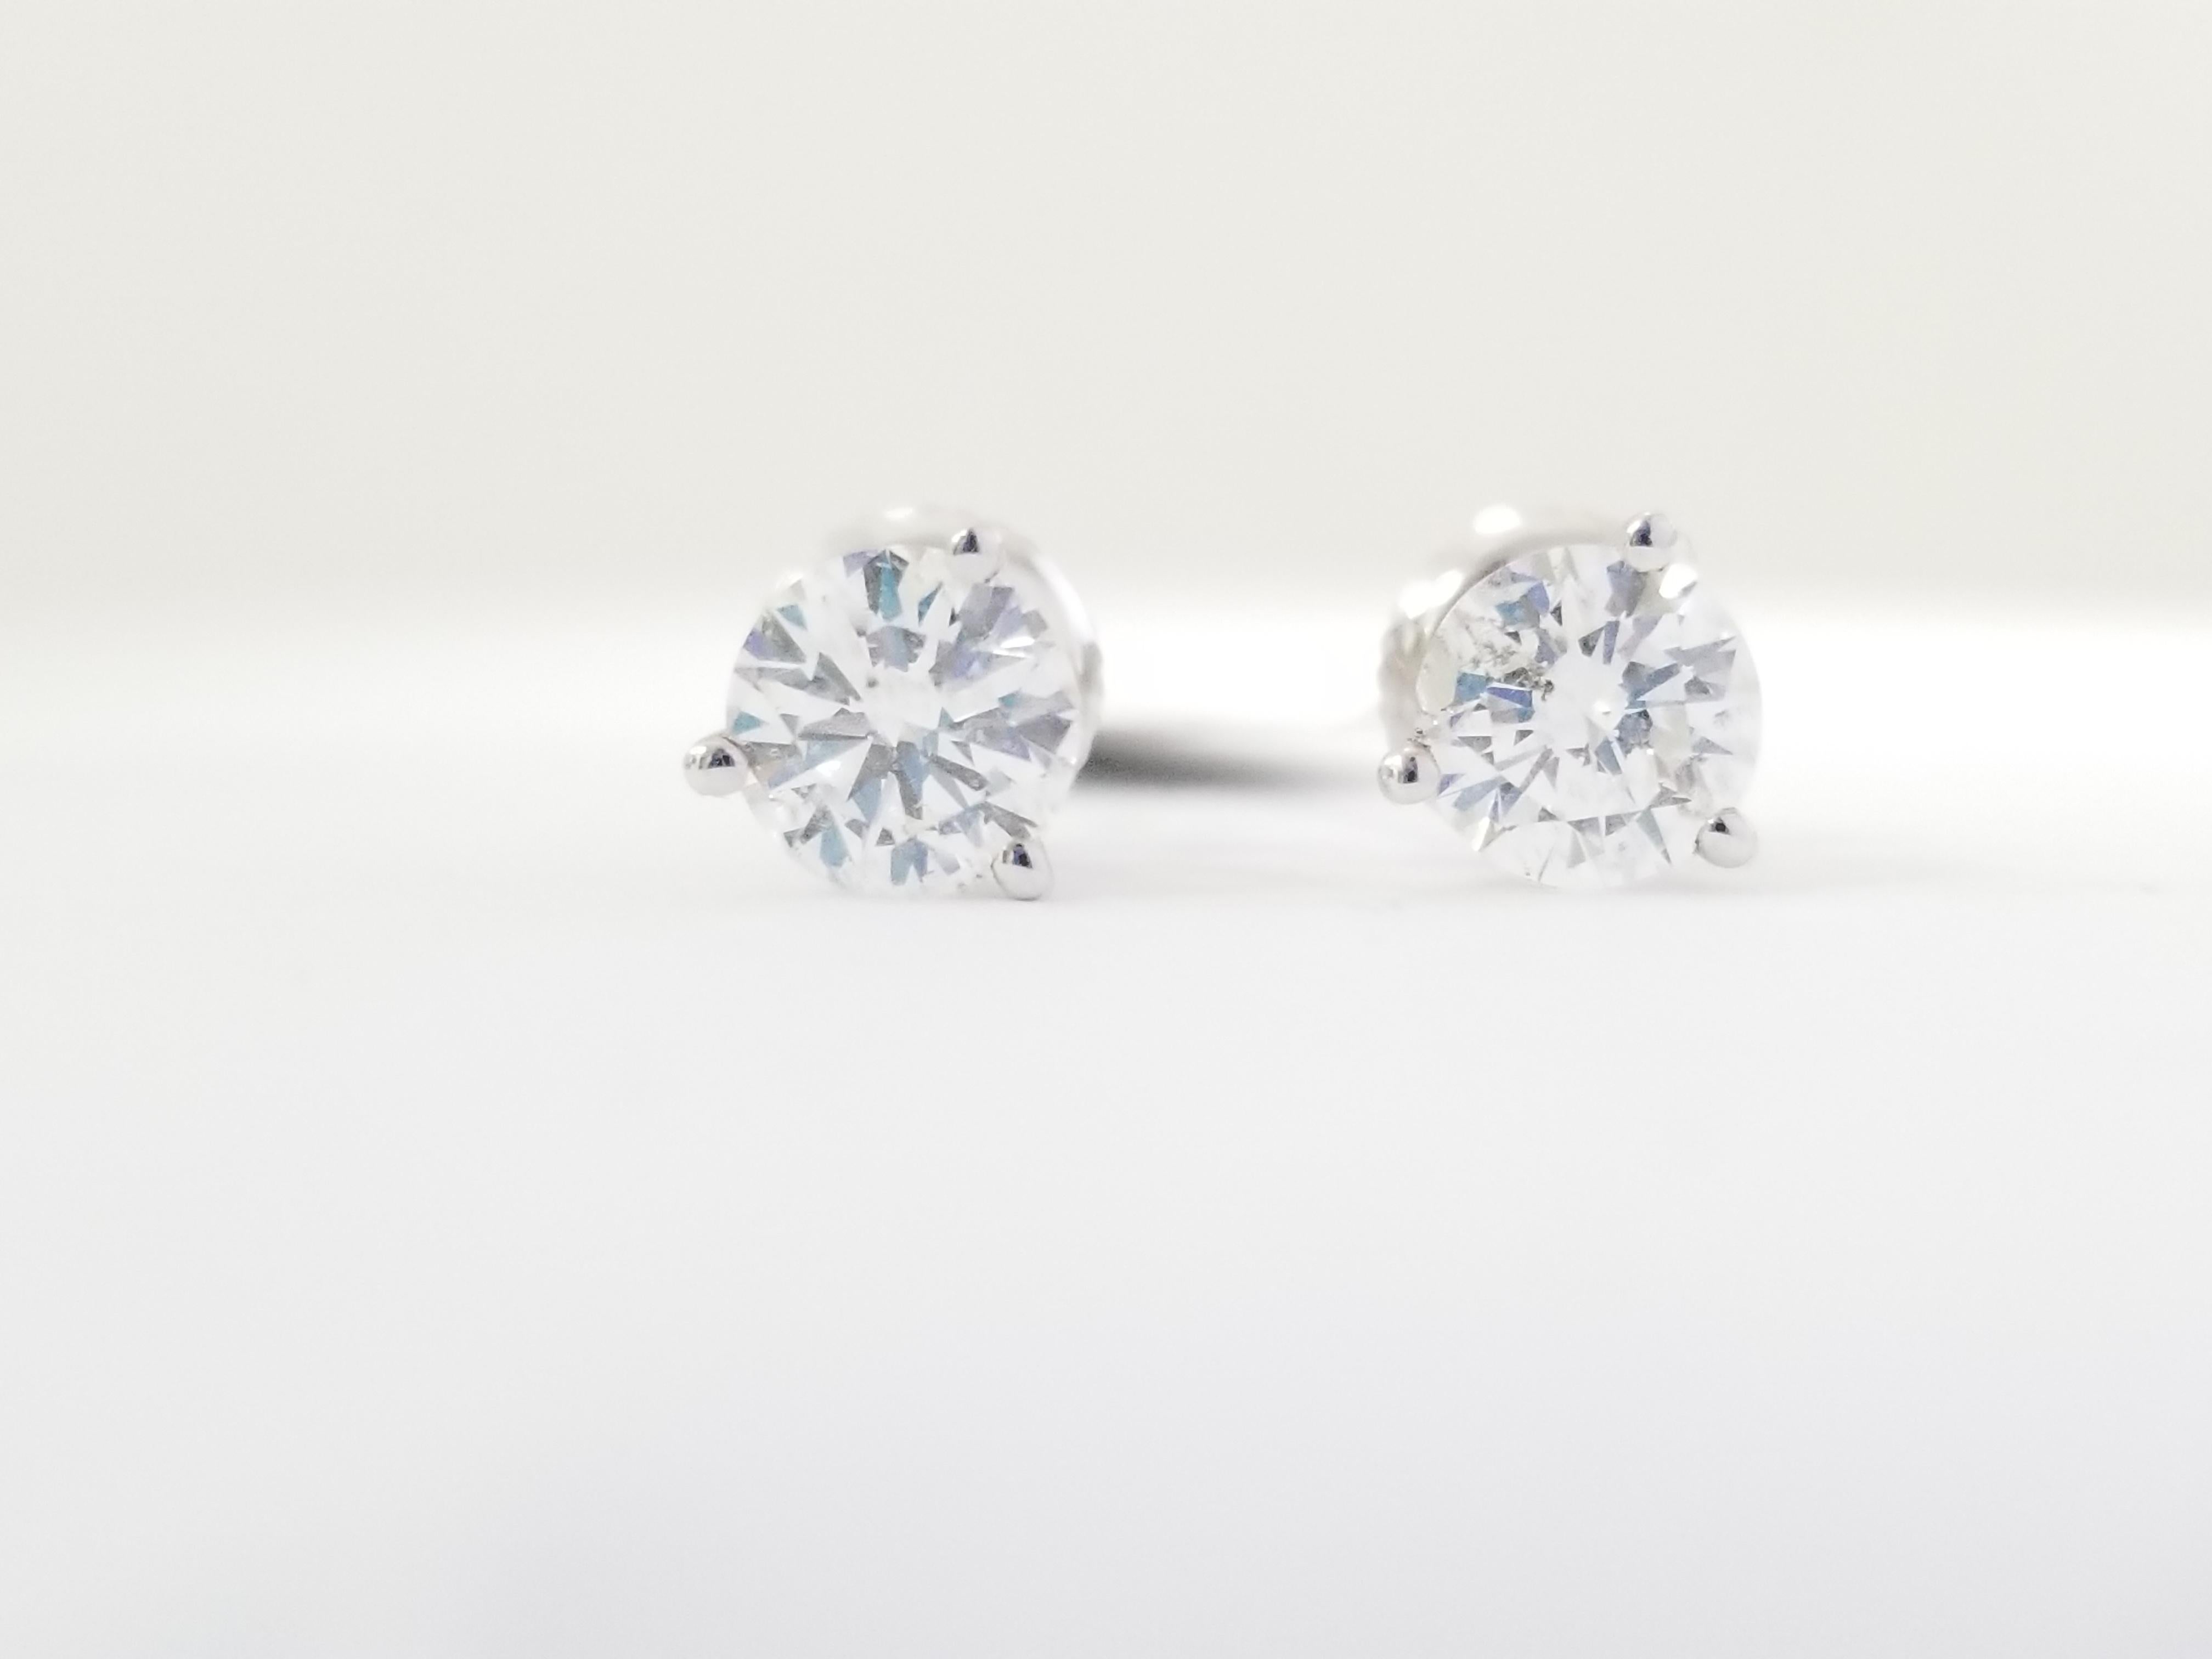 Natural Round Diamond Studs set in 3 prong martini setting with screw back 14k white gold 1.40 carats total weight. White face up, Clean. Average Color H-I, Clarity VS-SI.